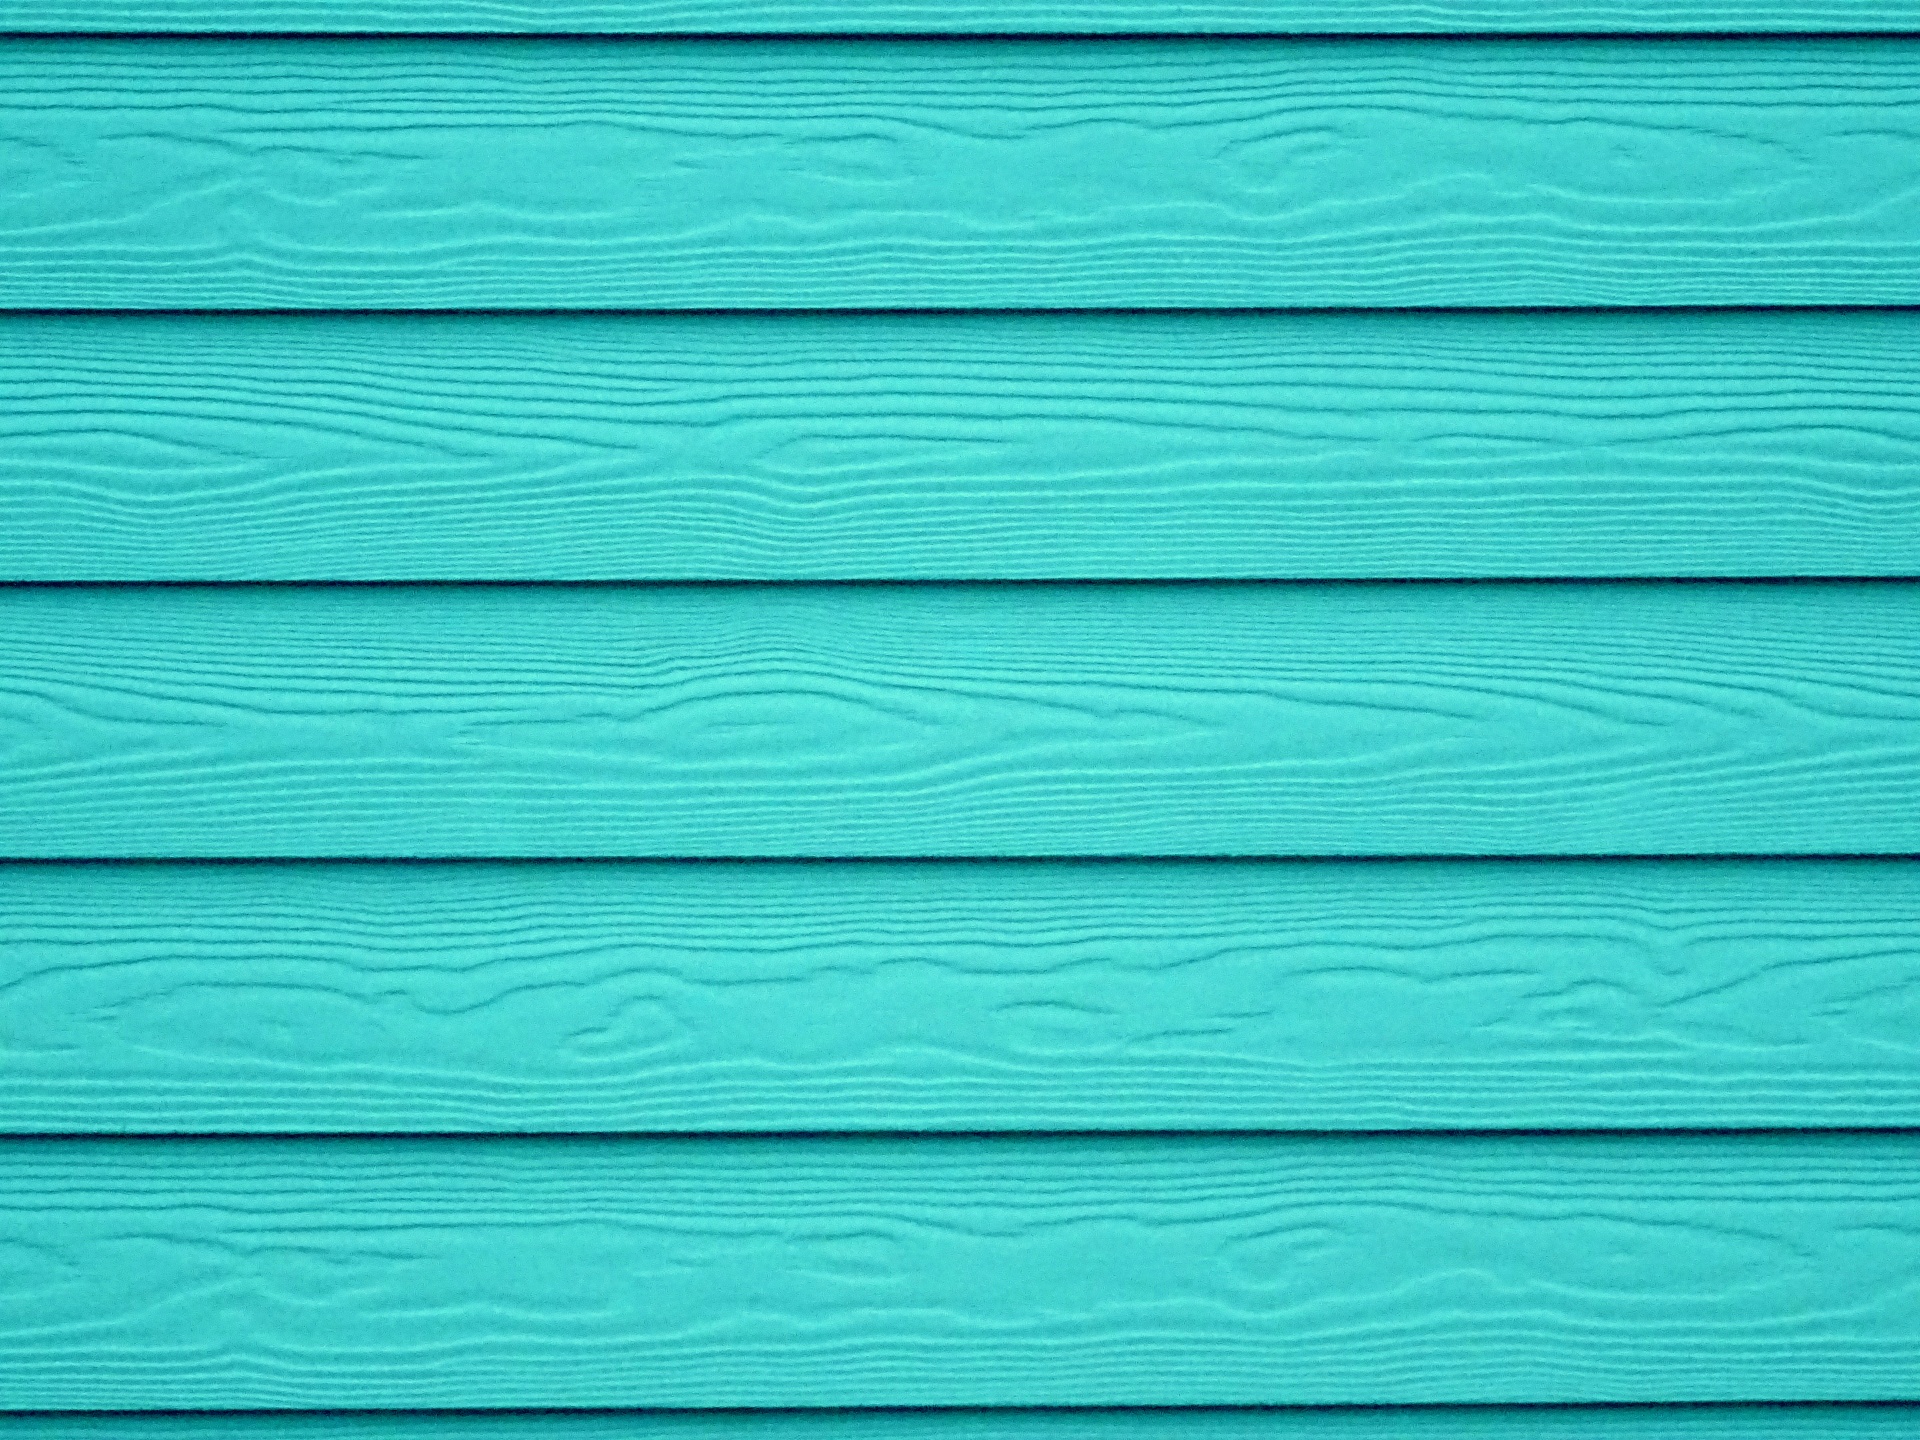 Turquoise Wood Texture Wallpaper